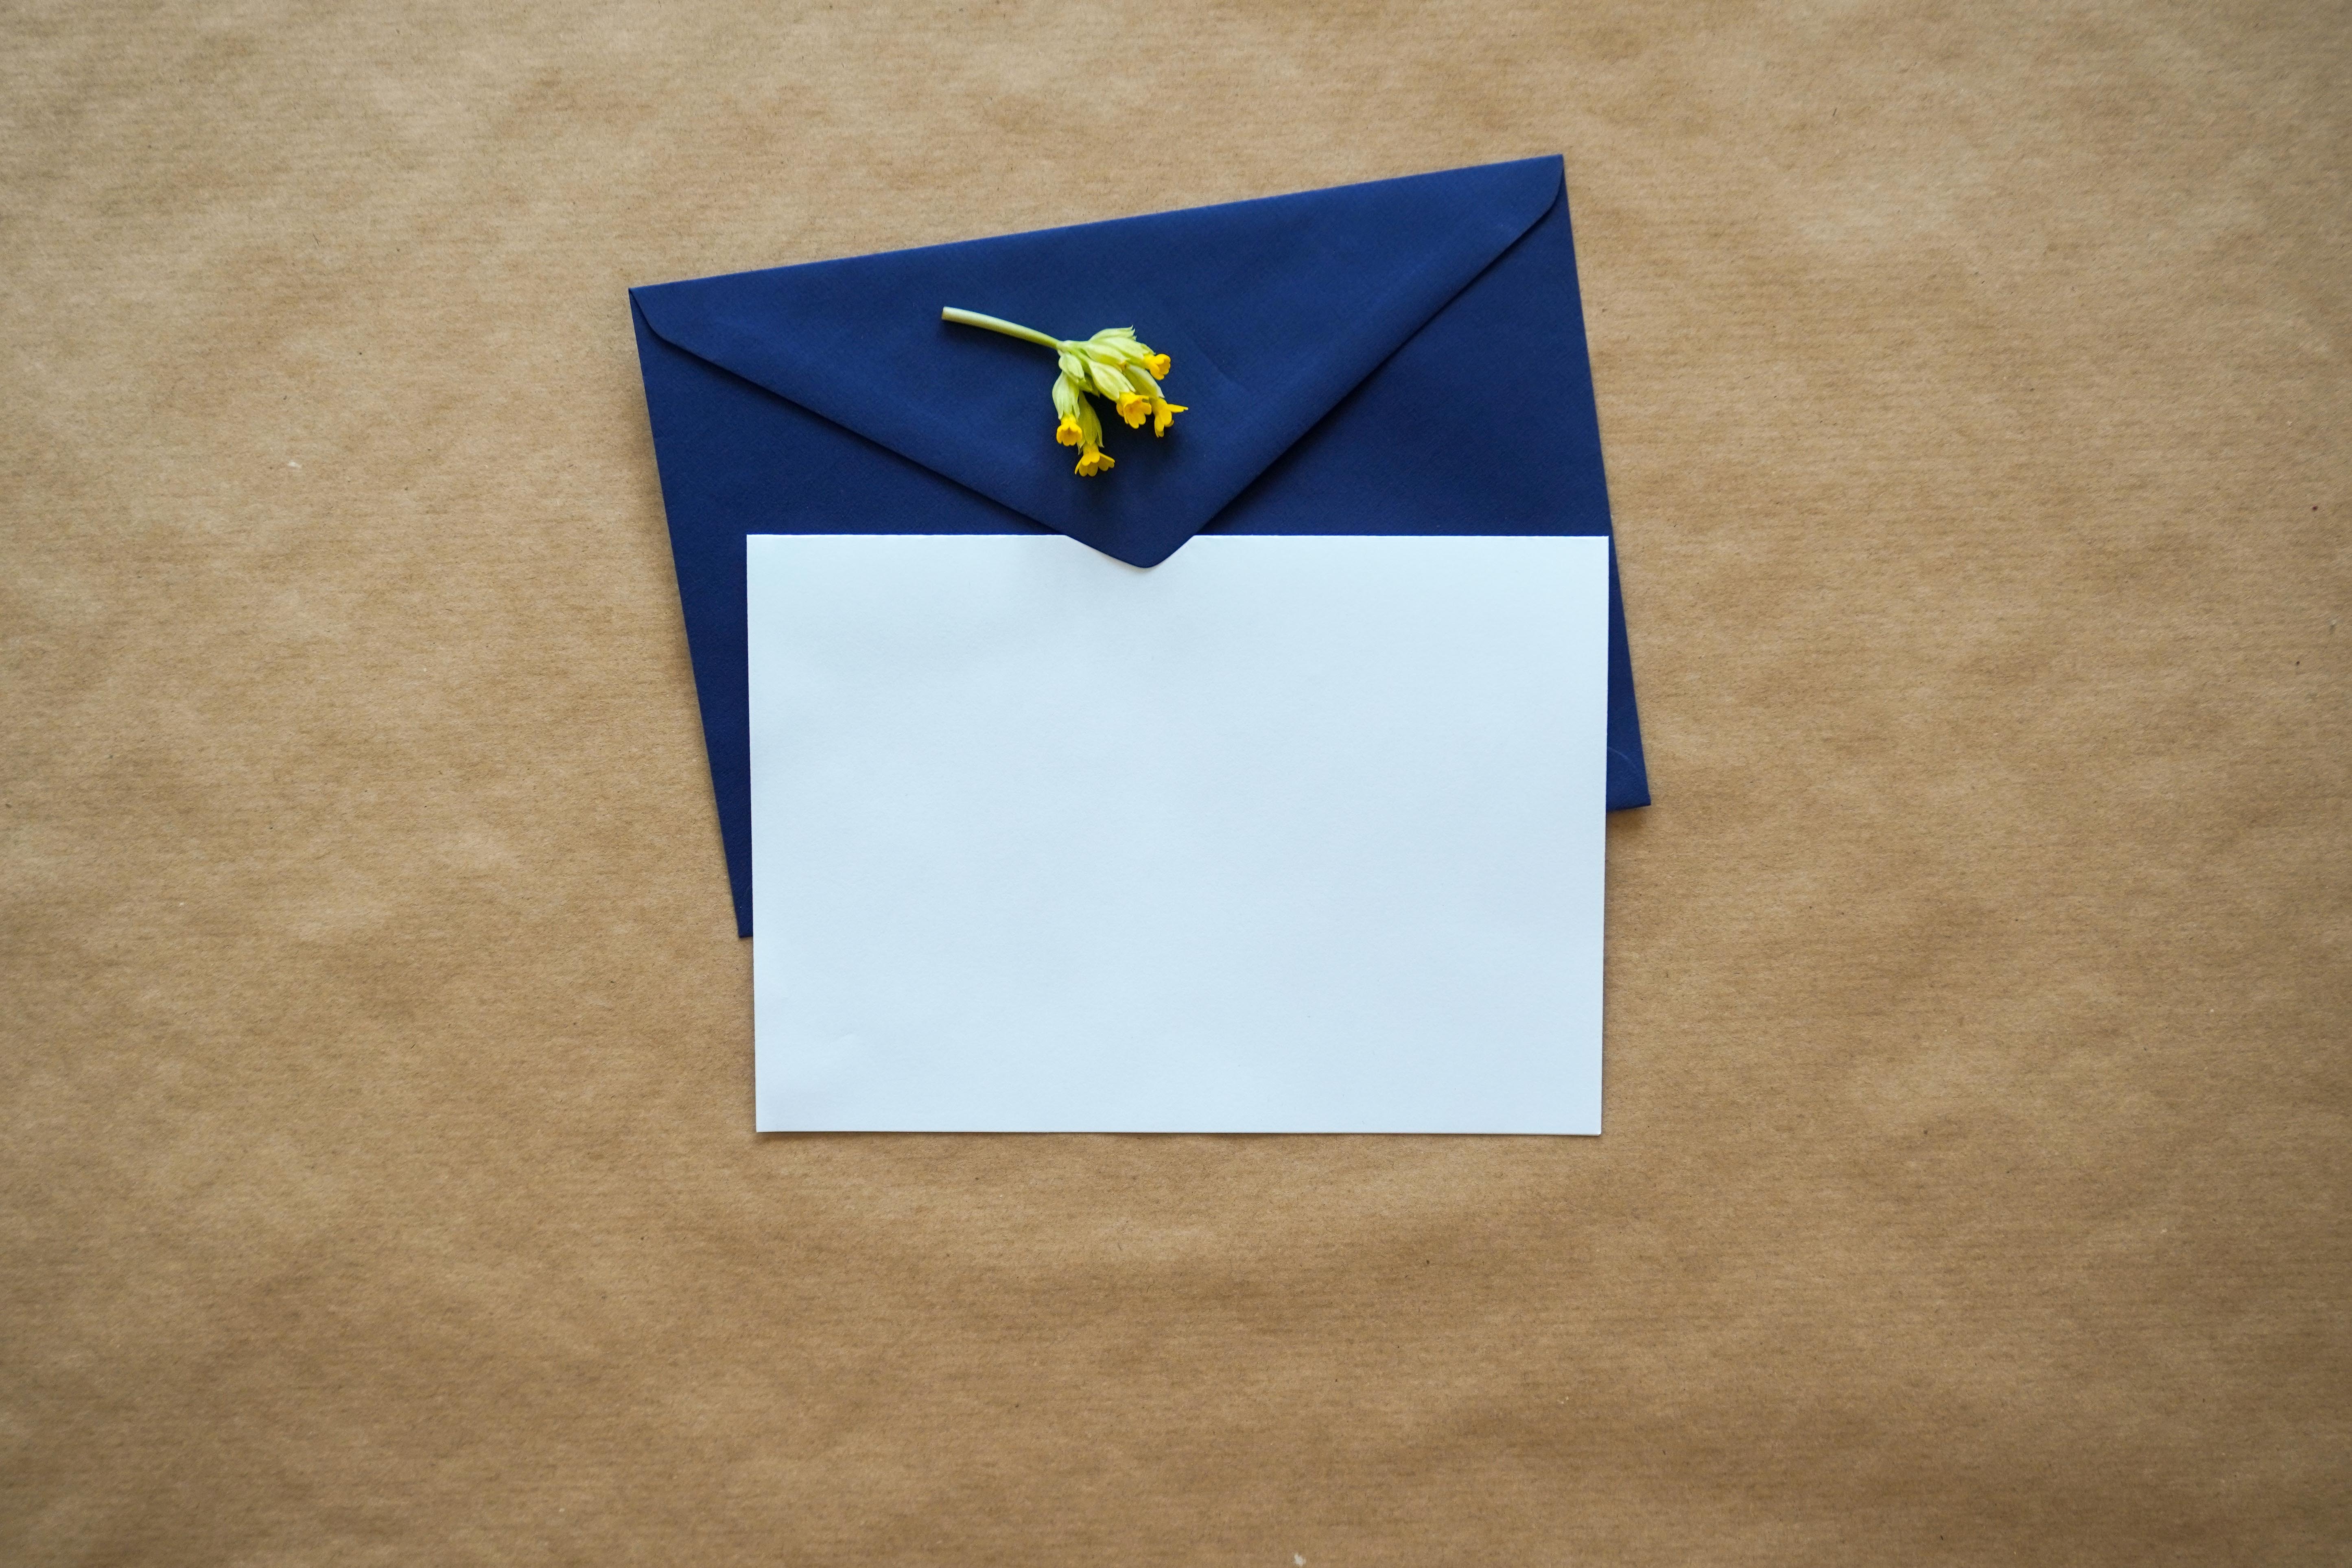 The letter was sent by Troy | Photo: Pexels